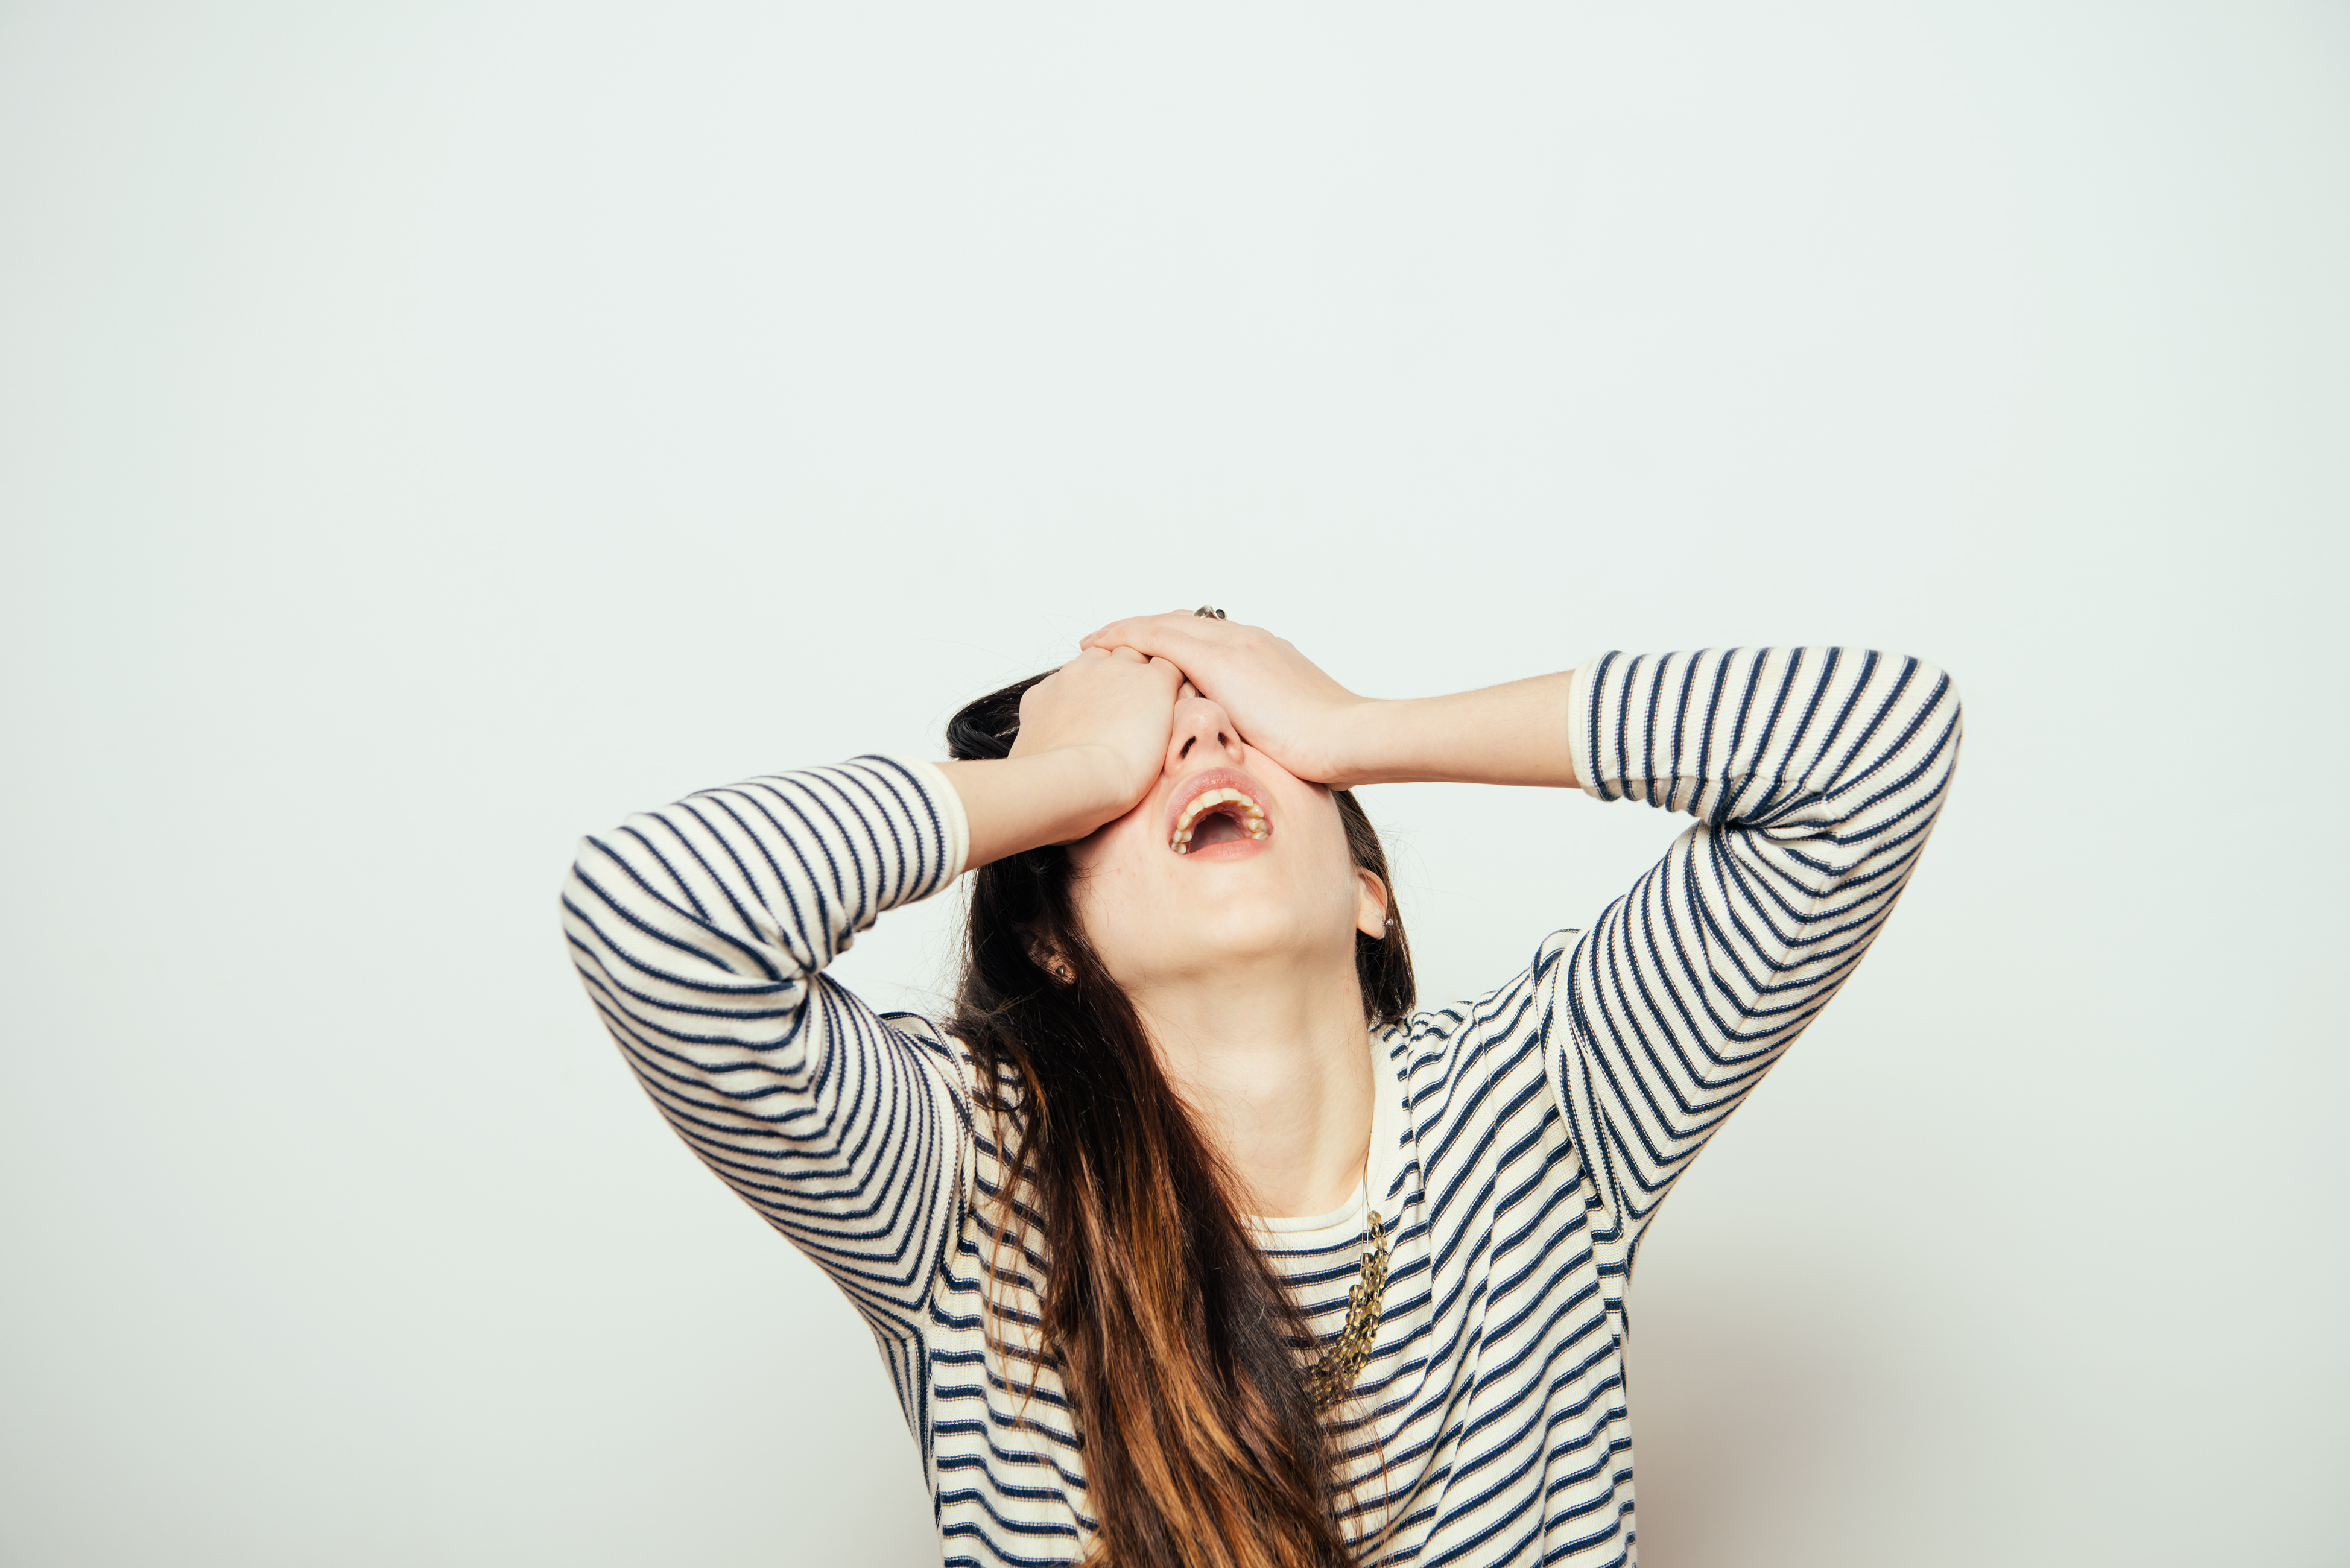 Frustrated woman with her hands over her eyes | Source: Shutterstock